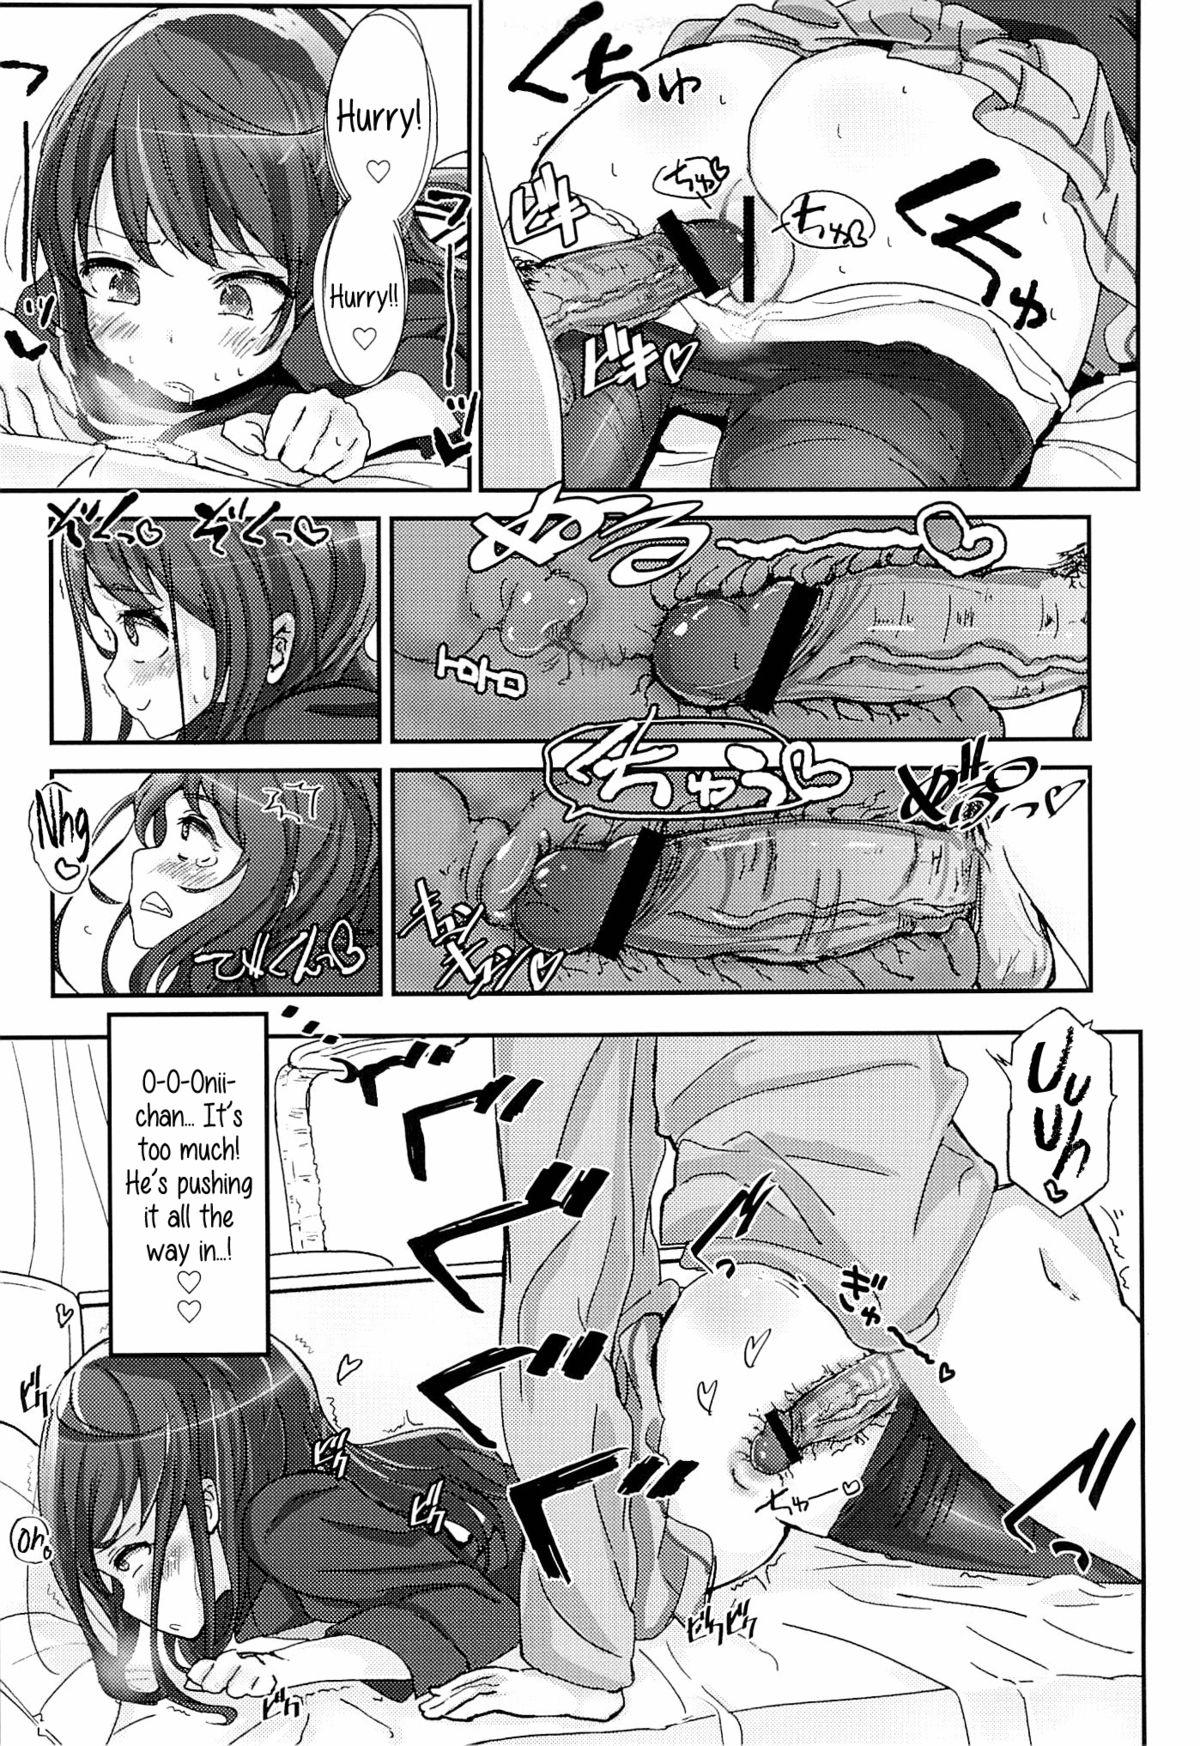 Canadian Shikyuukou no Kanata, Onii chan no Hate | Beyond the mouth of the uterus lies Onii-chan’s demise Facebook - Page 6